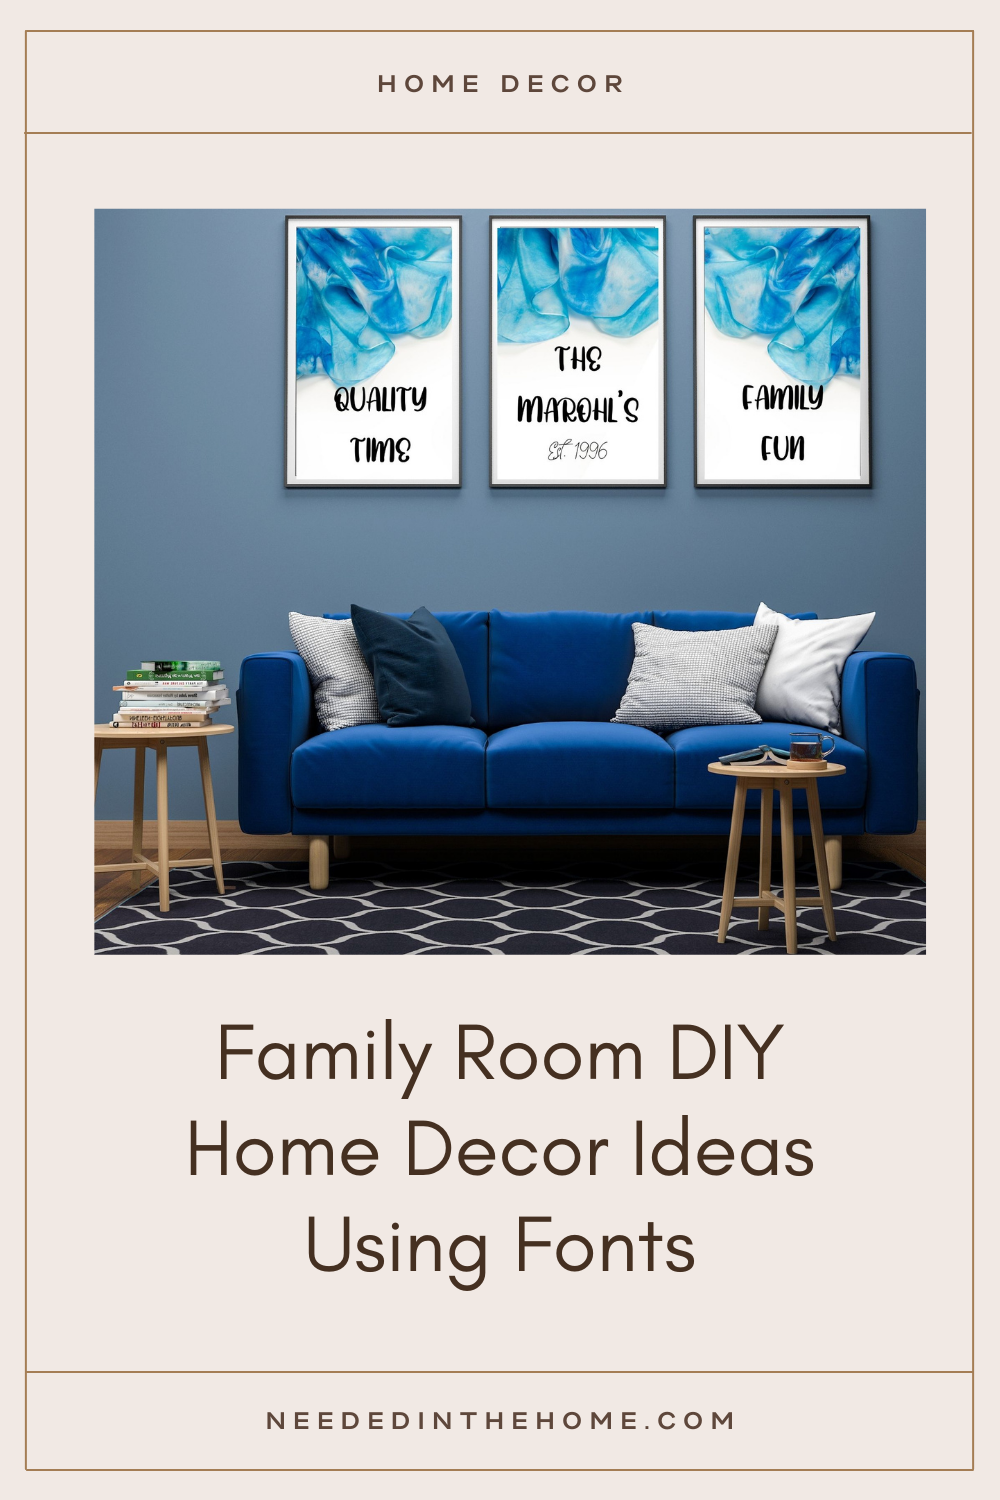 pinterest-pin-description home decor quality time the marohl's est 1996 family fun family room diy home decor ideas using fonts neededinthehome